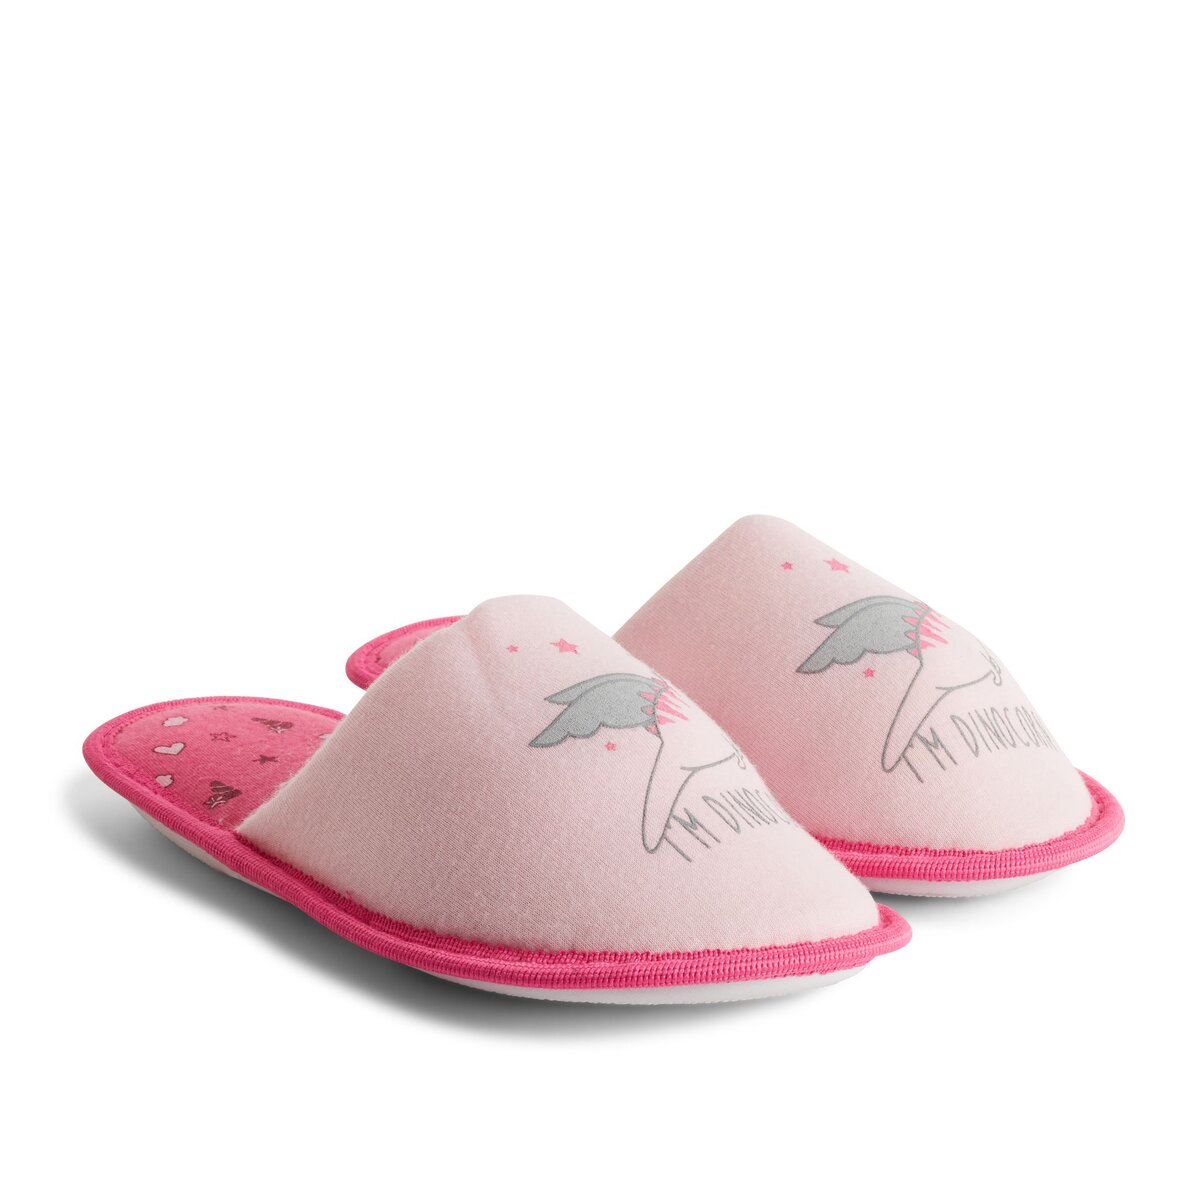 IN EXTENSO Chaussons licorne fille